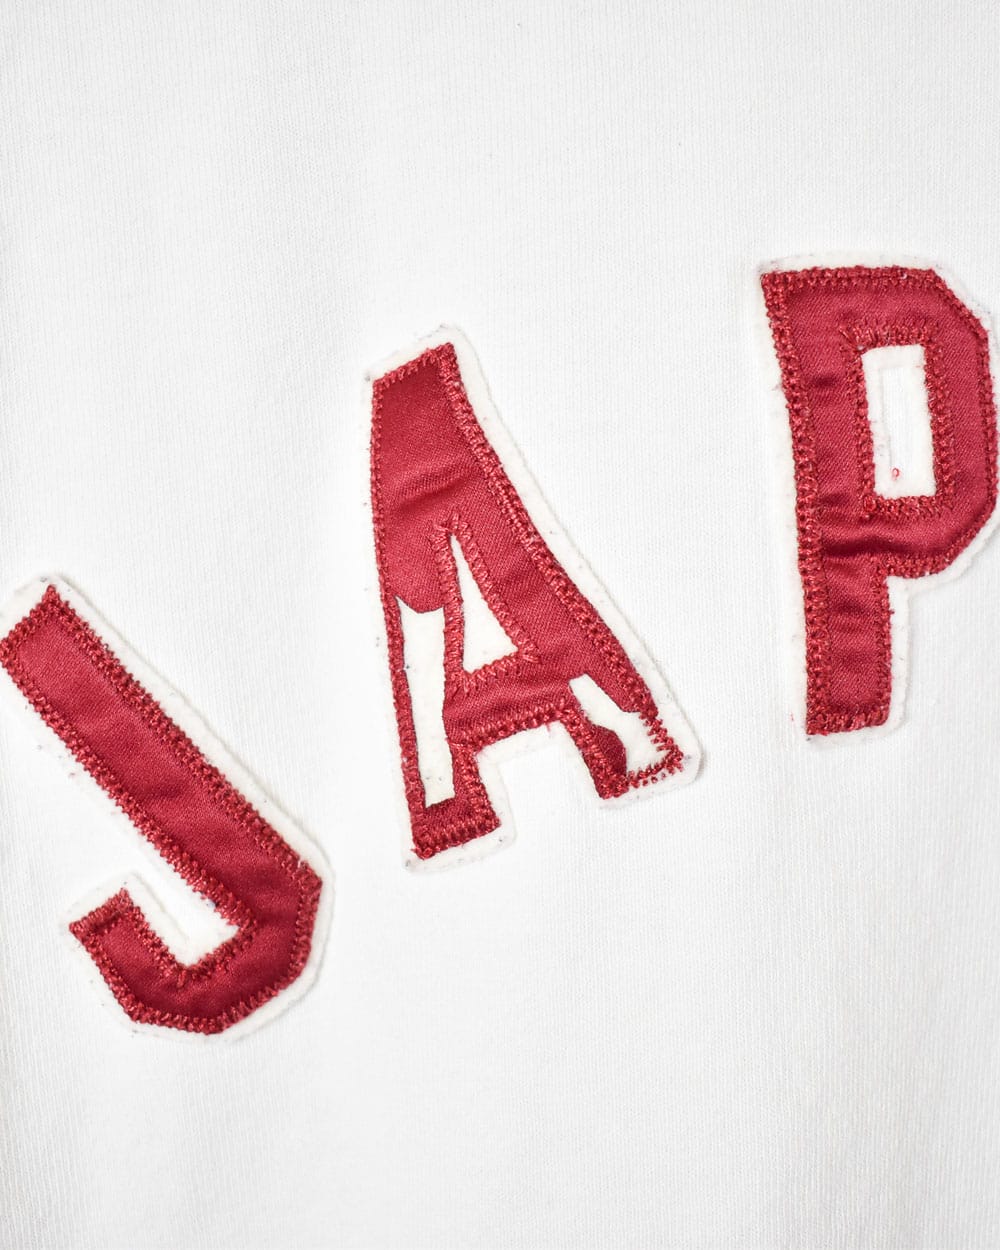 White Polo Ralph Lauren Japan Rugby Shirt - X-Large